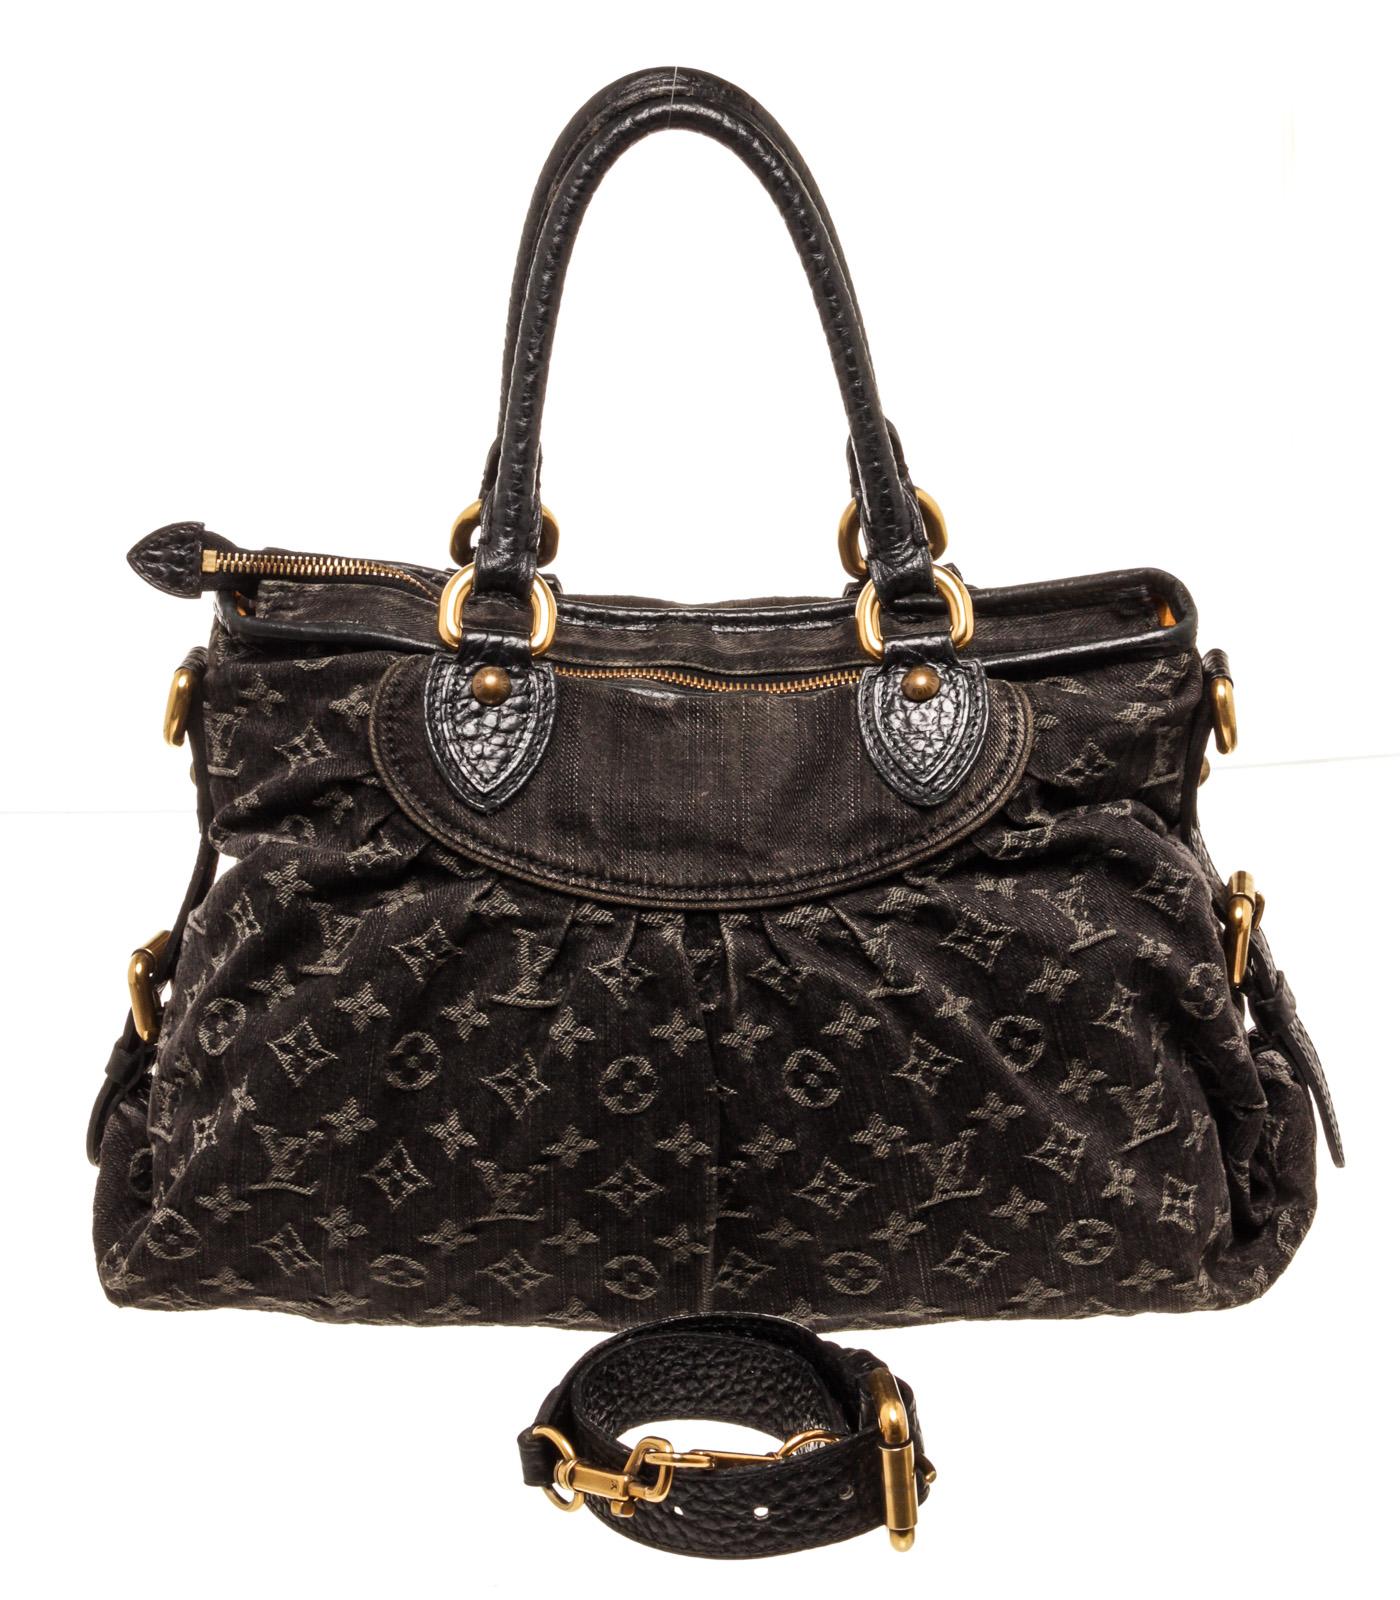 Louis Vuitton Black Monogram Neo Cabby MM Shoulder Bag In Good Condition For Sale In Irvine, CA